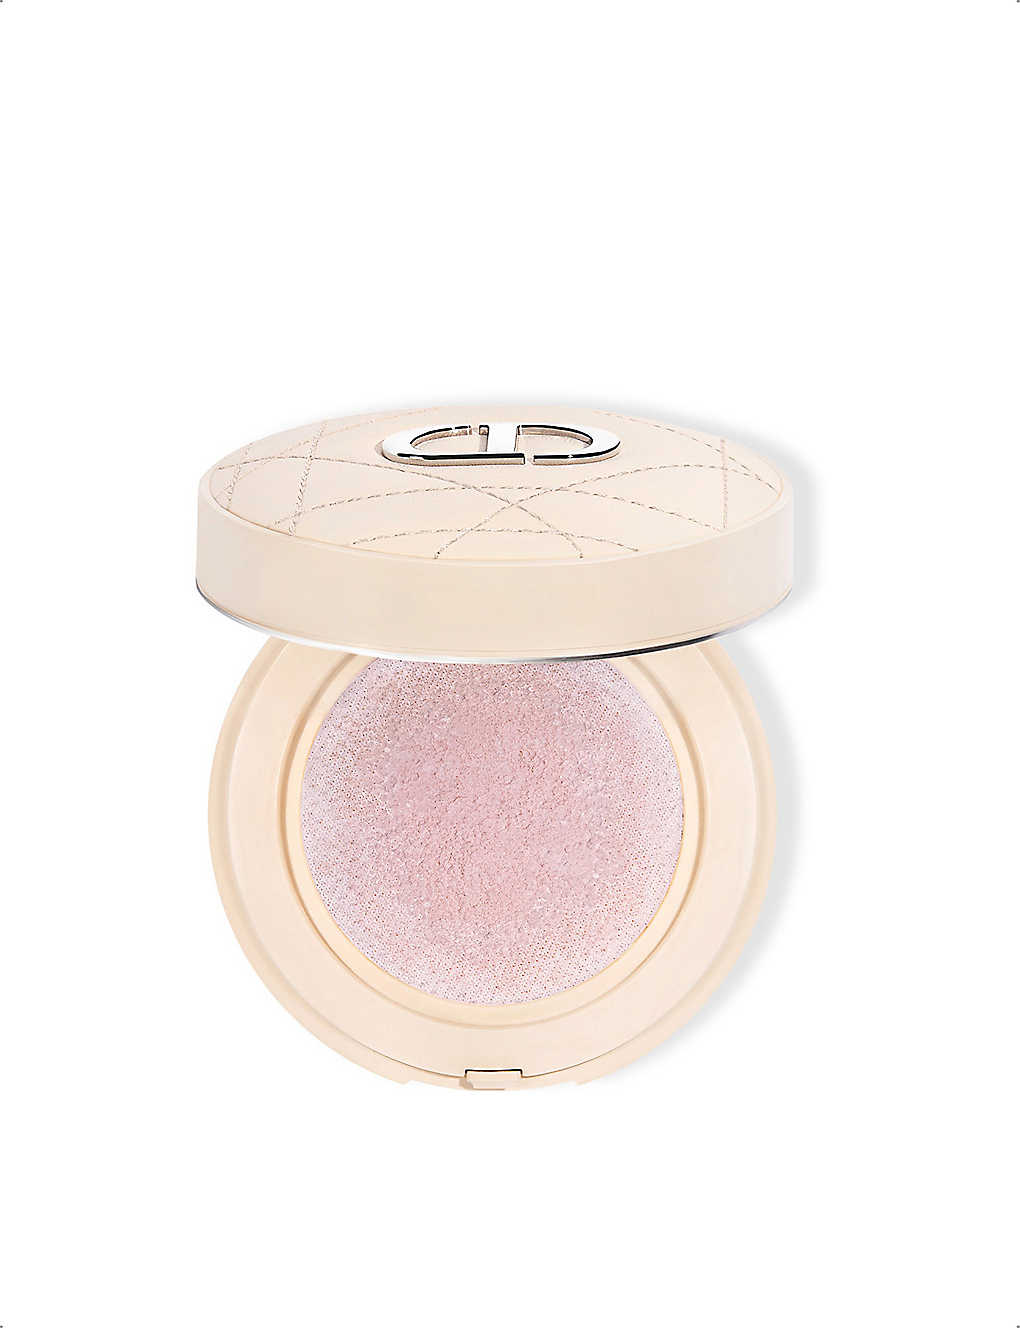 Dior Forever Cushion Loose Powder 10g In 050 Lavender